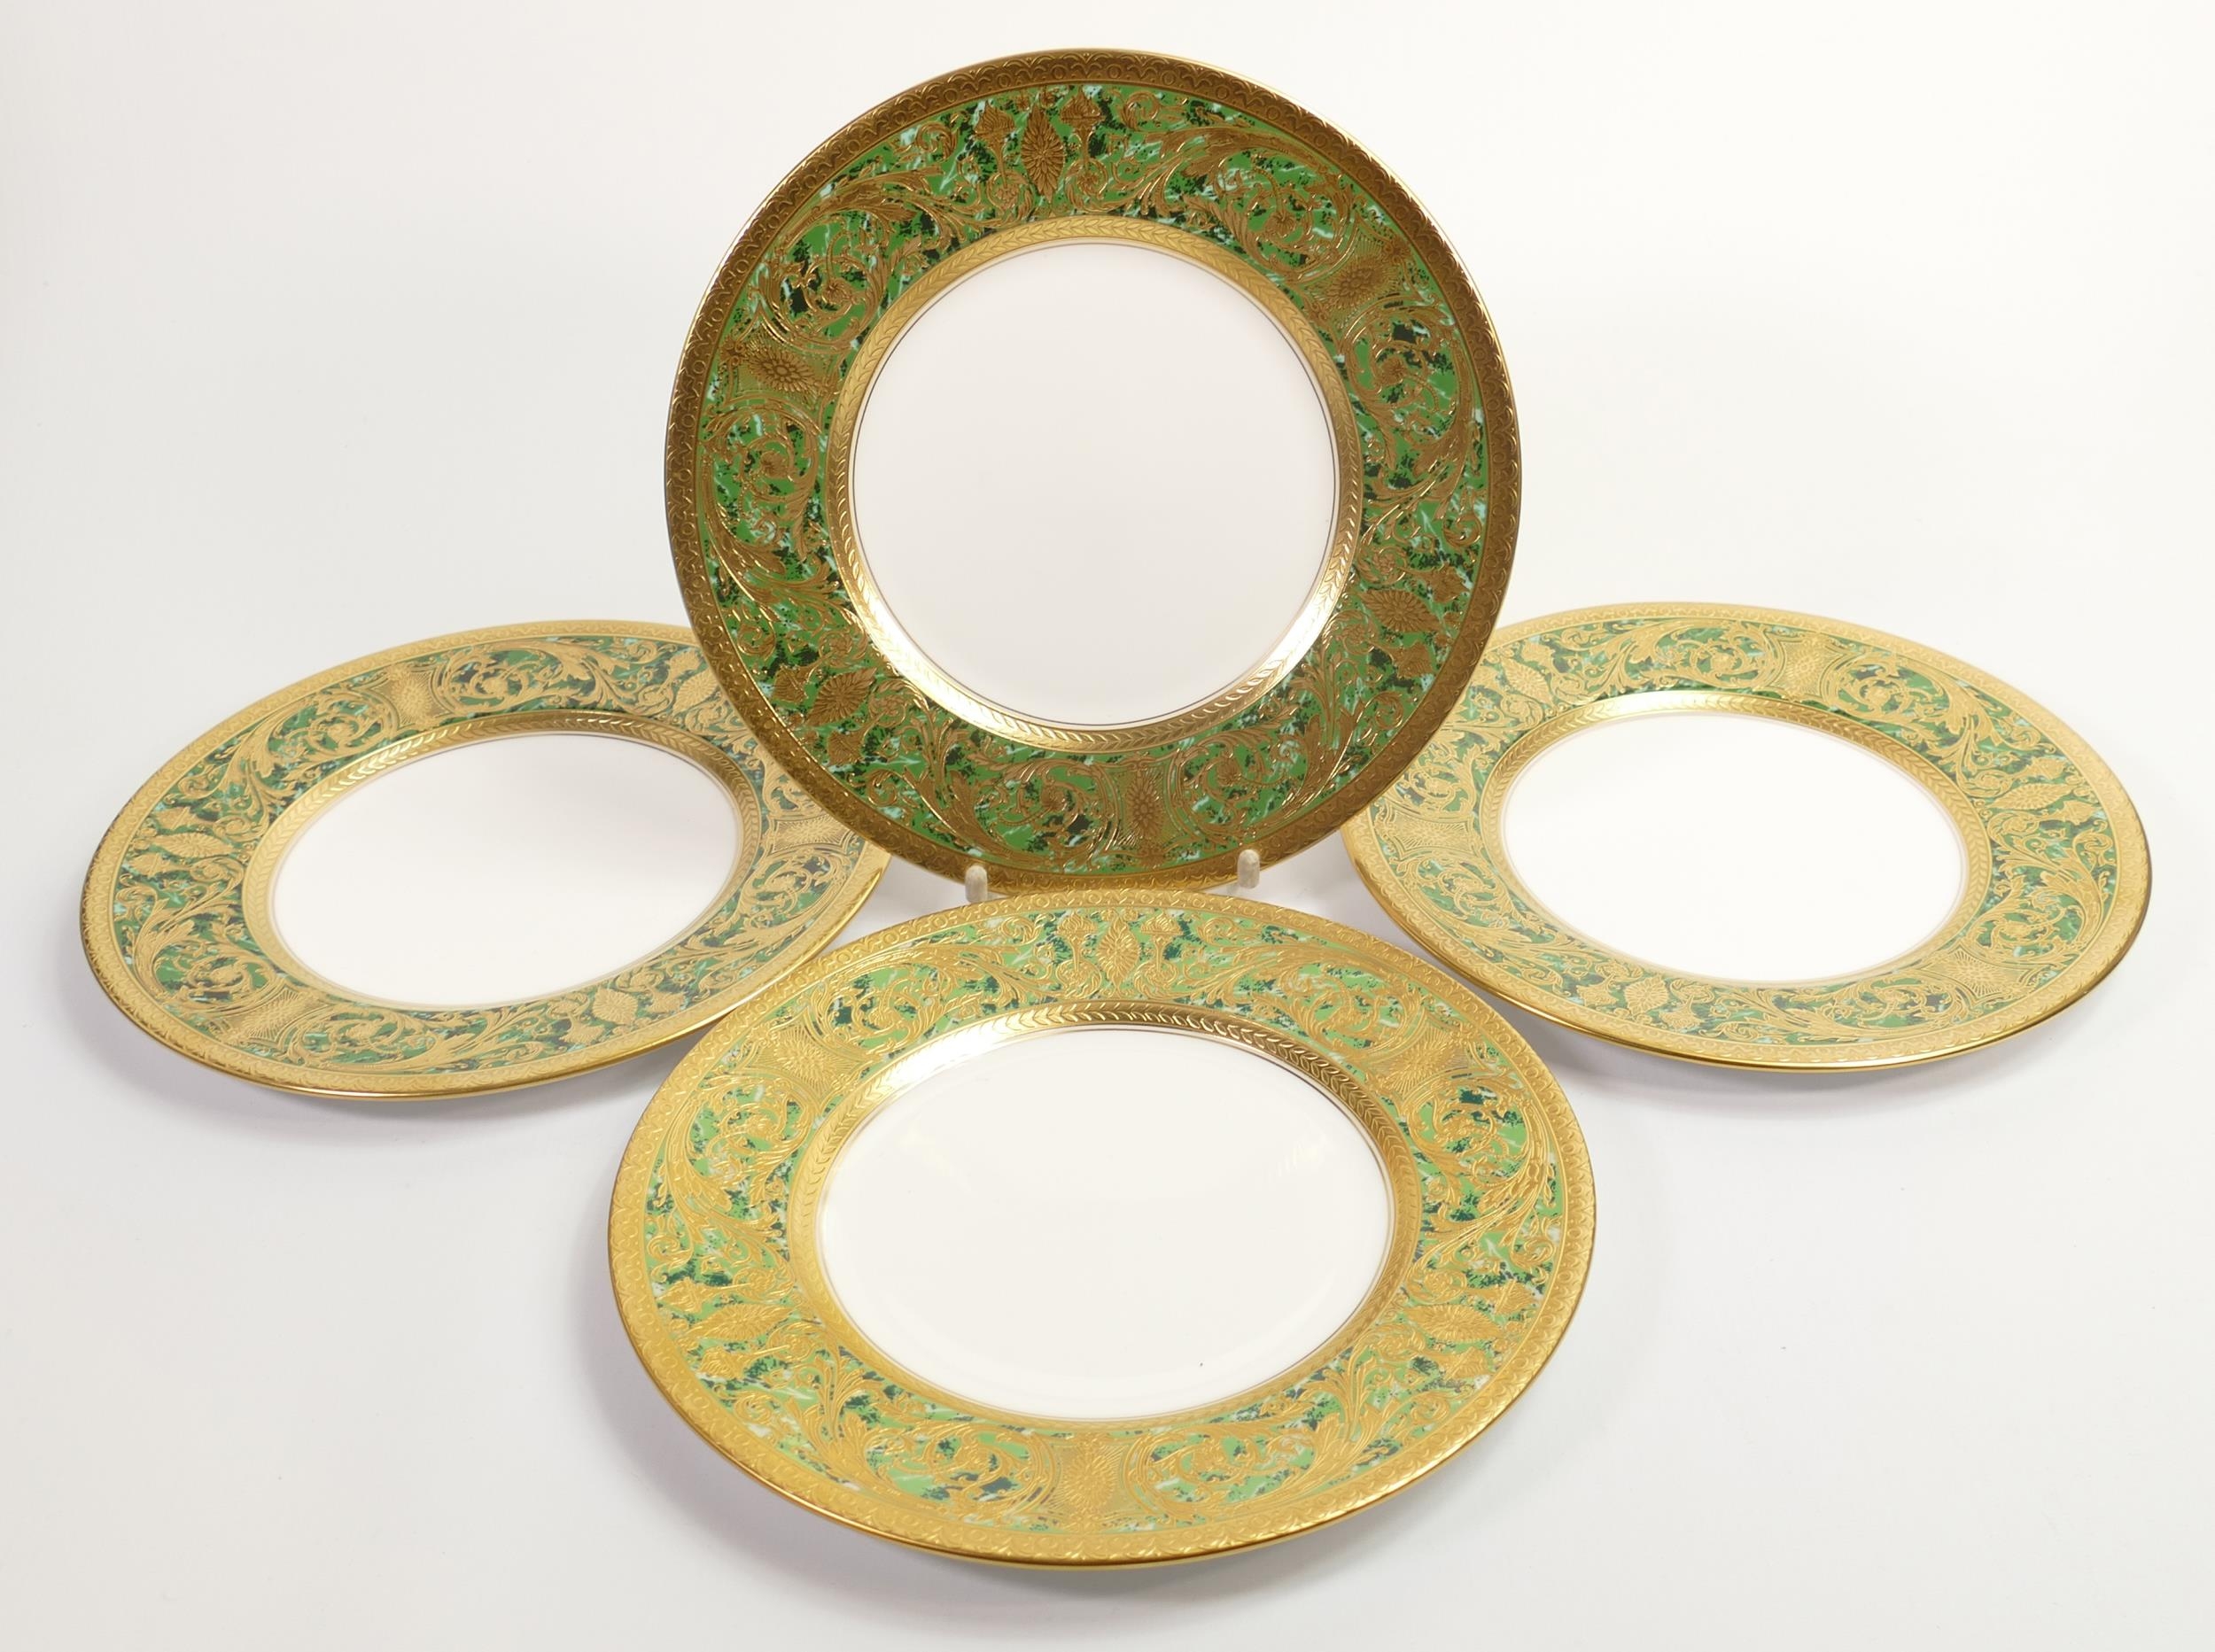 De Lamerie Fine Bone China heavily gilded Robert Adam patterned Salad Plates, specially made high